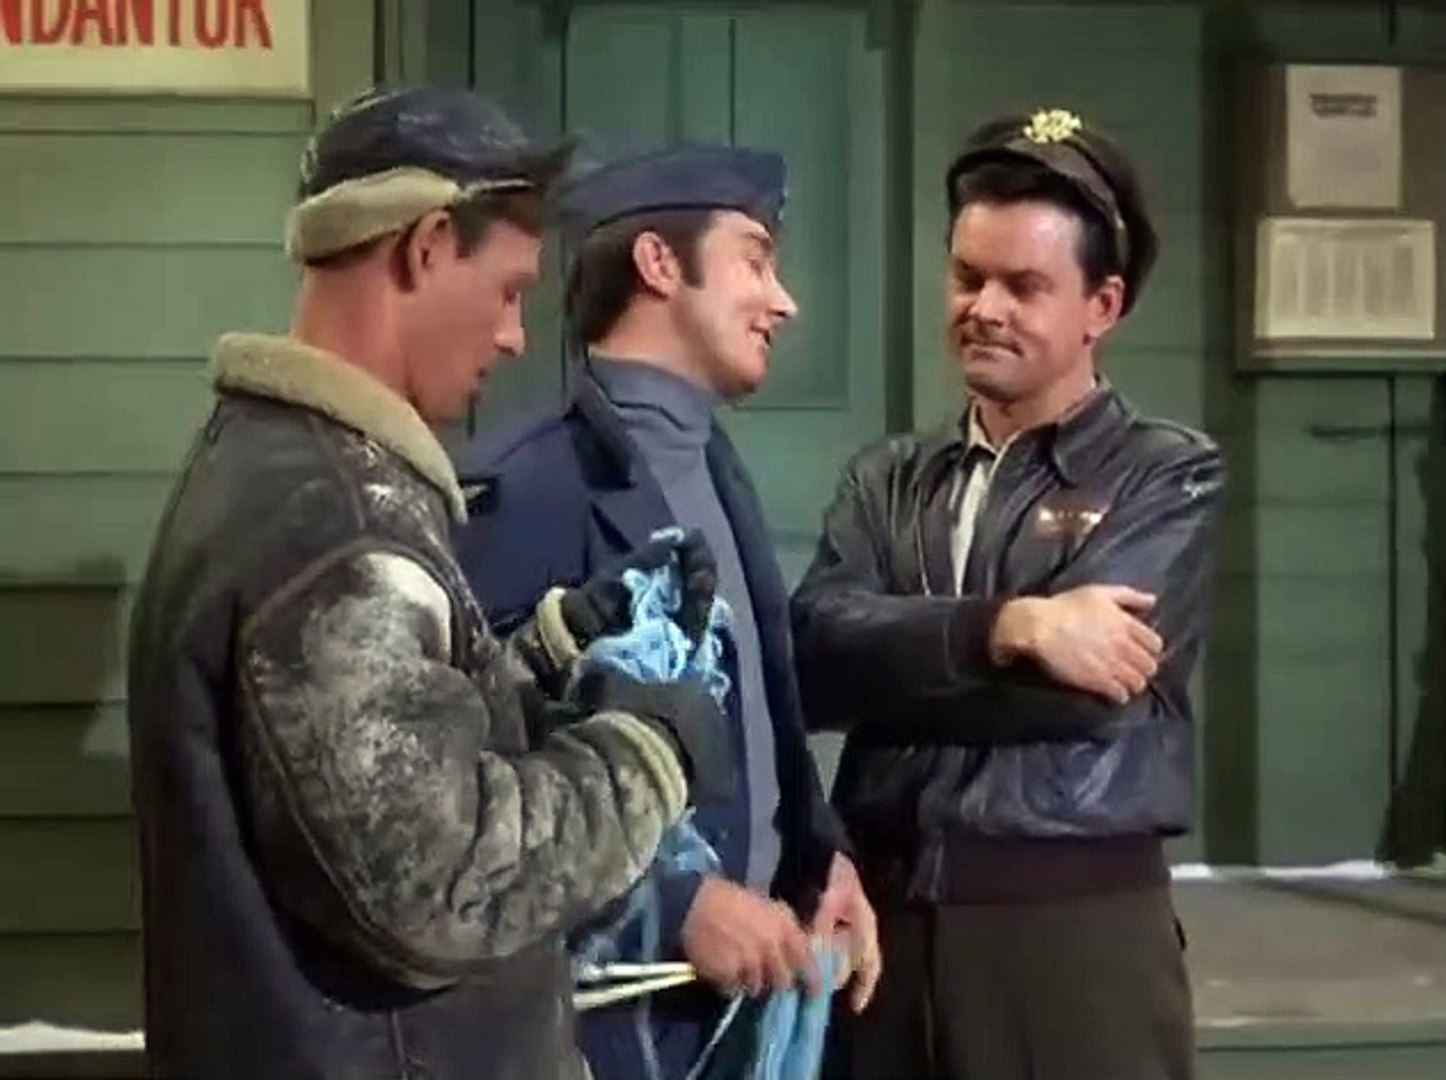 PART Cupid] It'll be the cooler every man who doesn't sparkle and shine!-Hogan's Heroes 1x30 - video Dailymotion